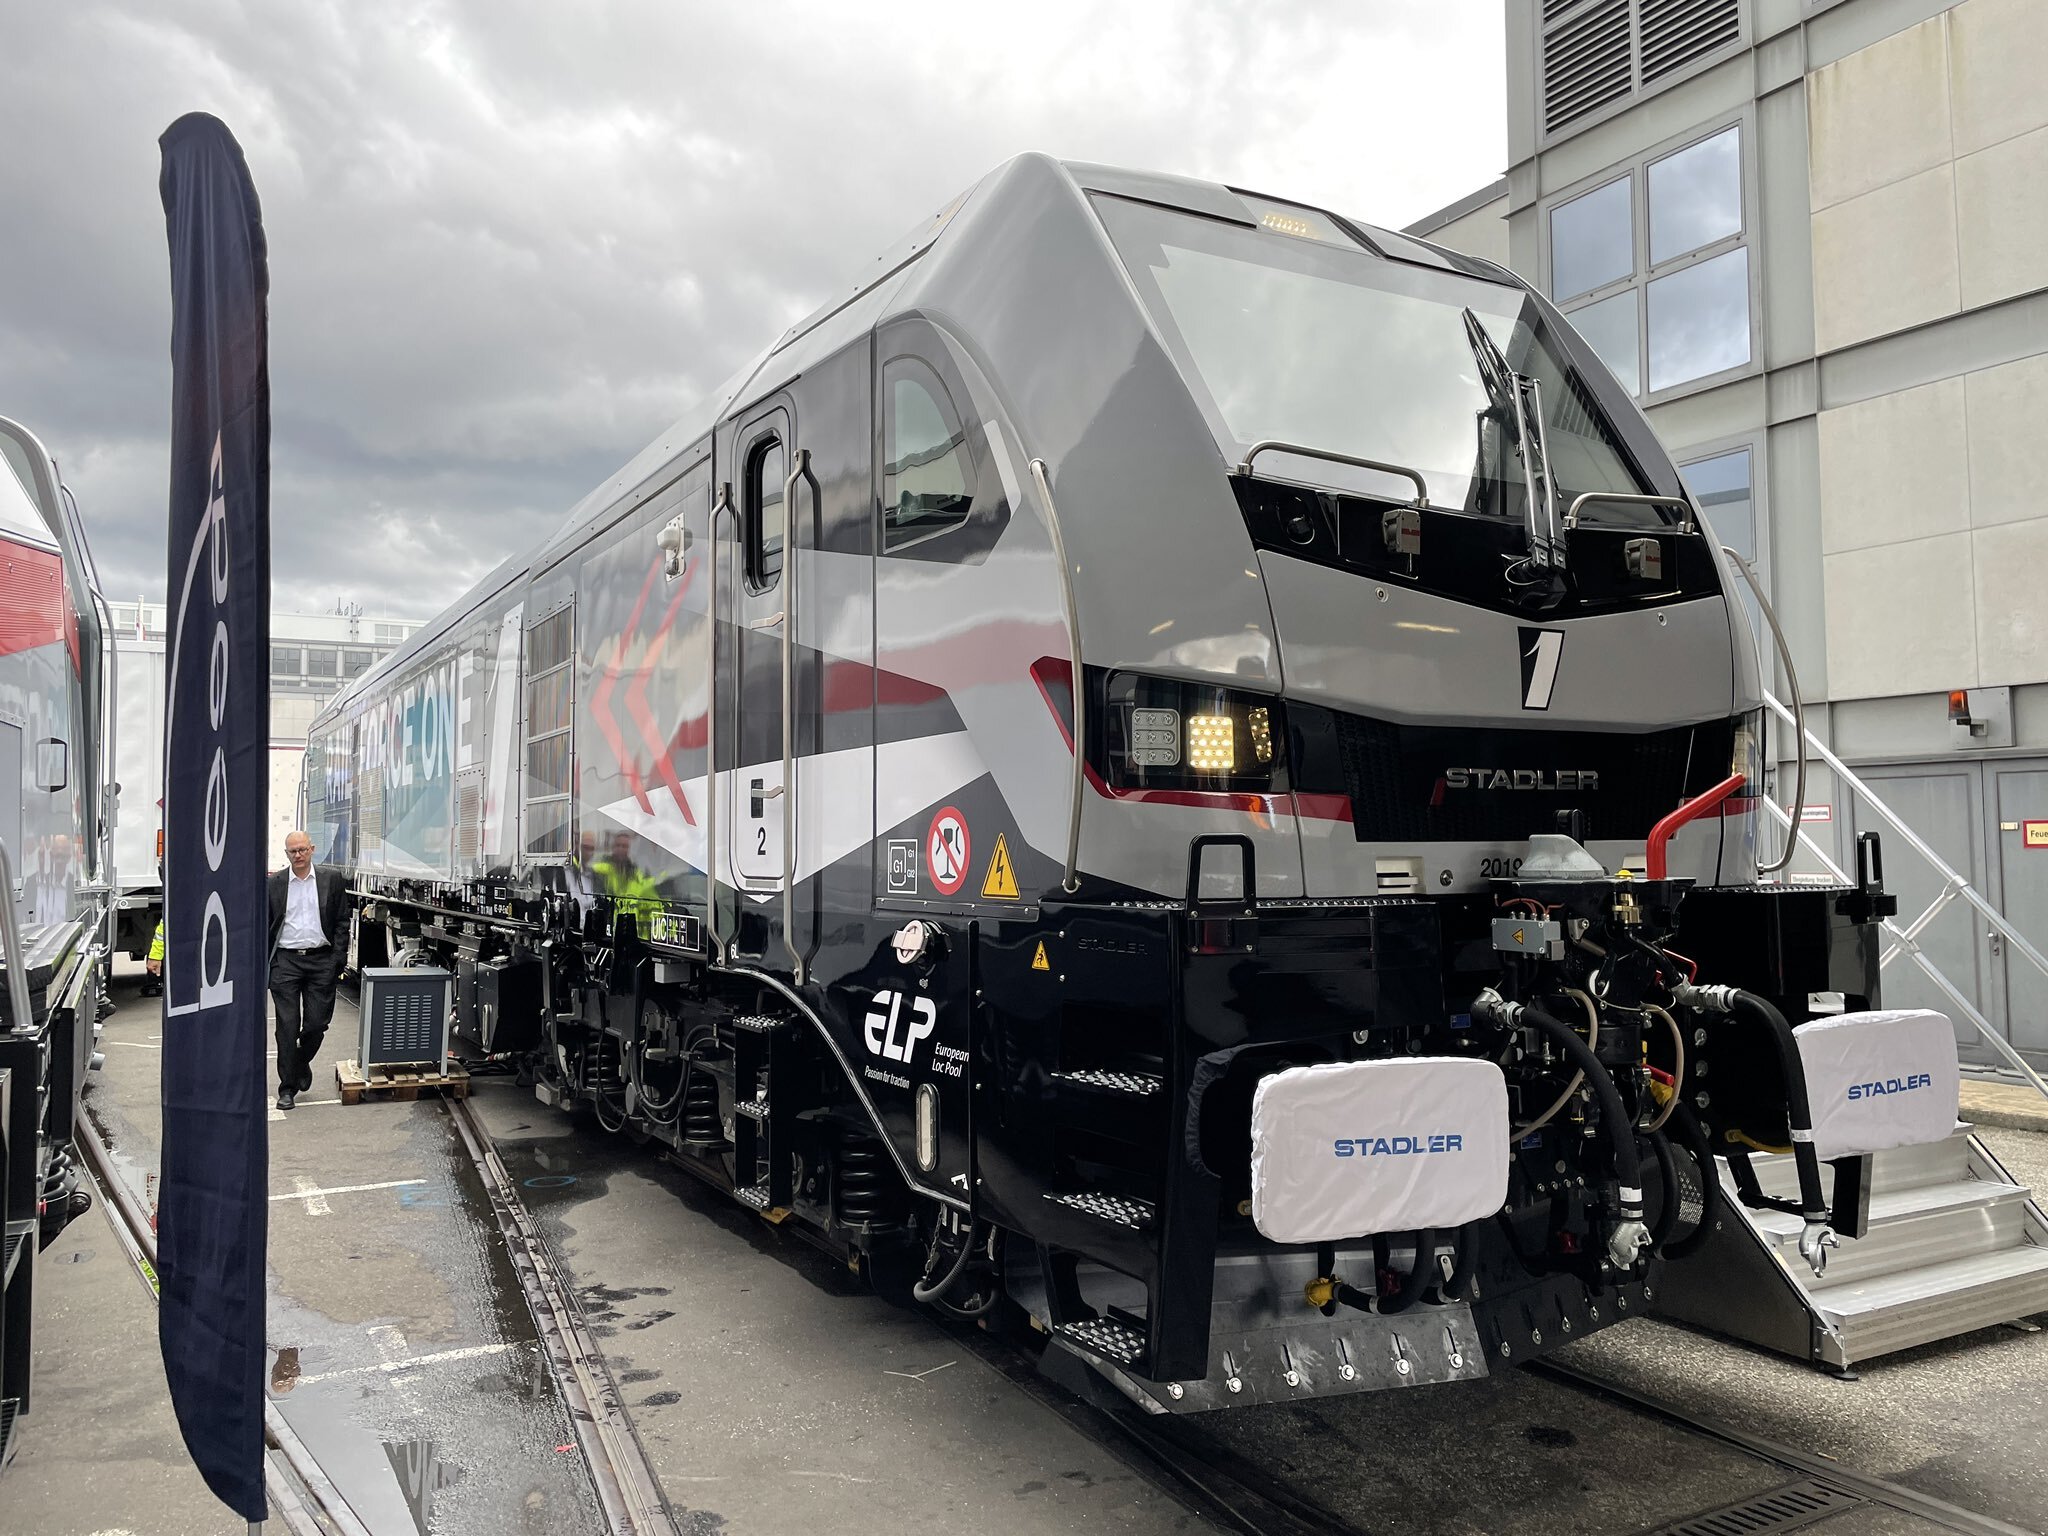 The most powerful tri-mode EURO9000 locomotive by Stadler